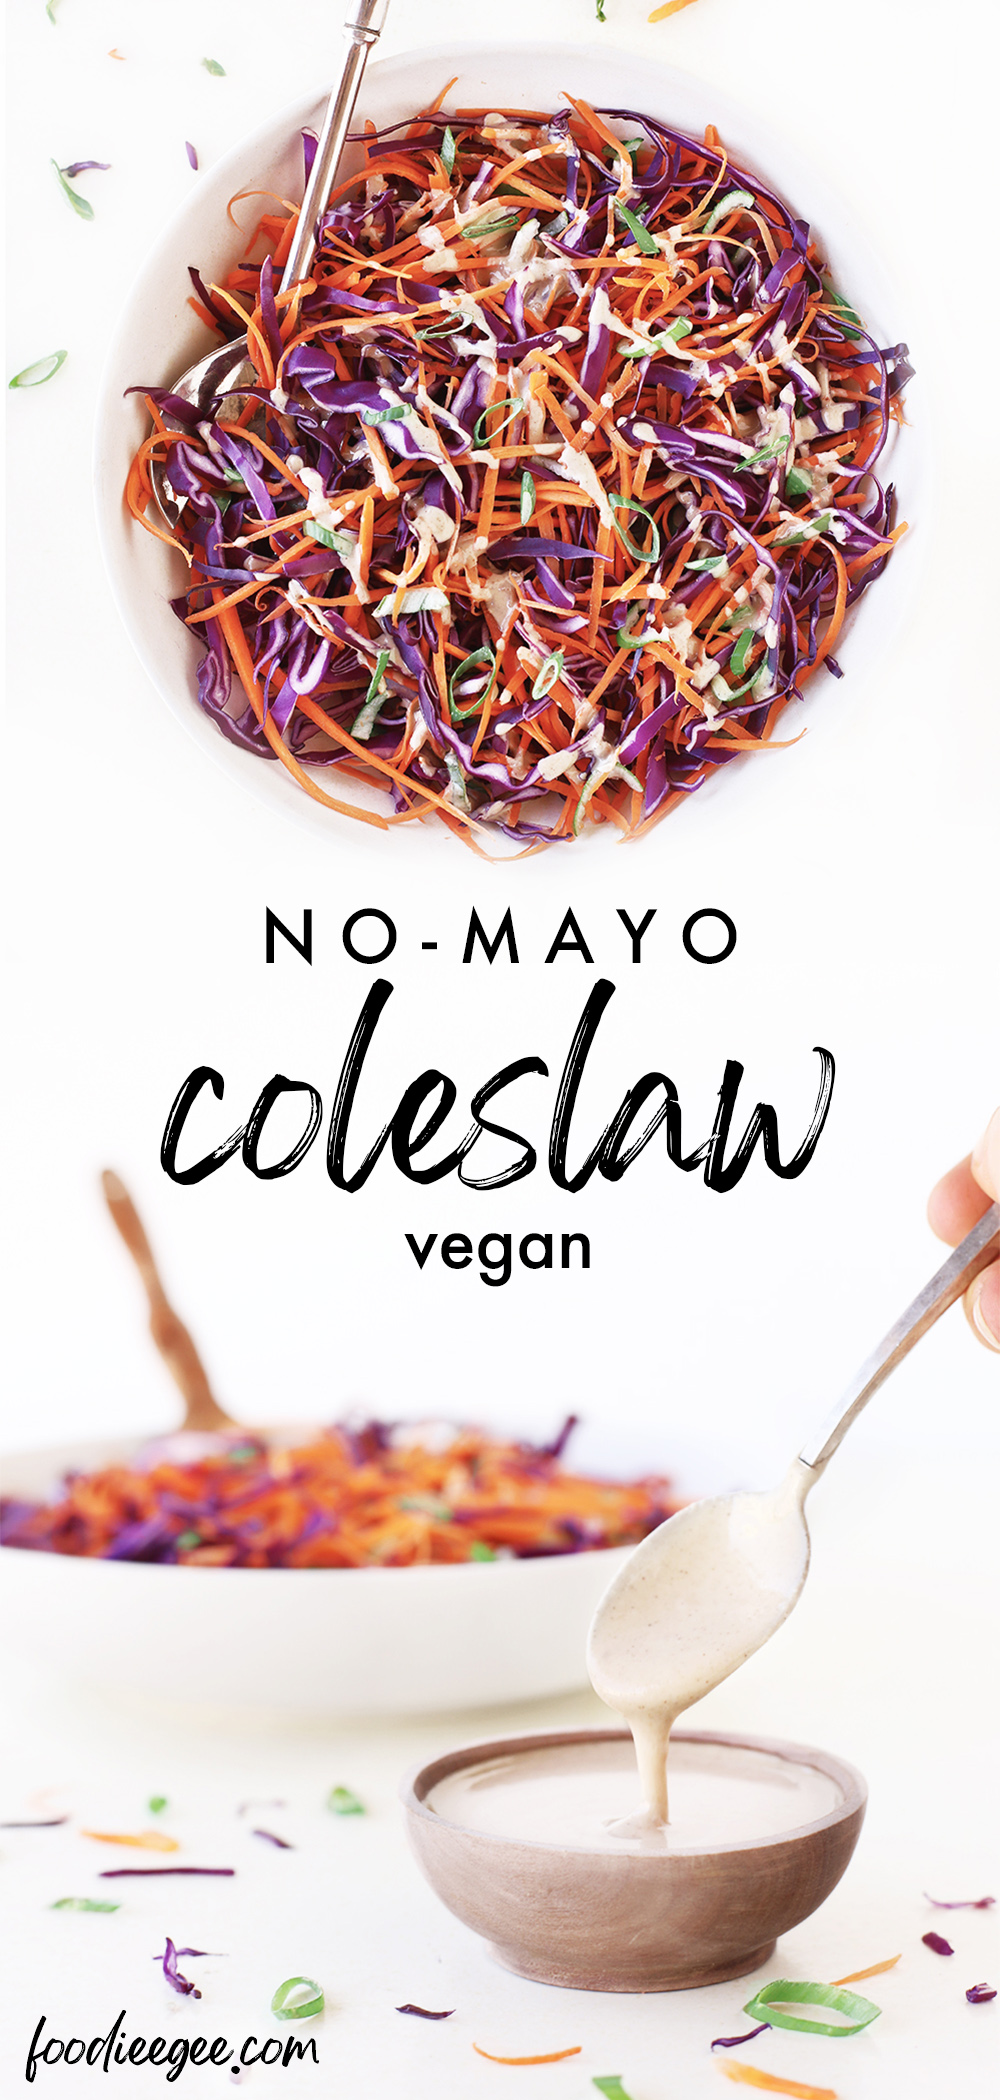 Vegan mayo free creamy coleslaw dressing with apple cider vinegar and no oil tossed into a healthy slaw salad with purple / red cabbage, carrot and spring onion